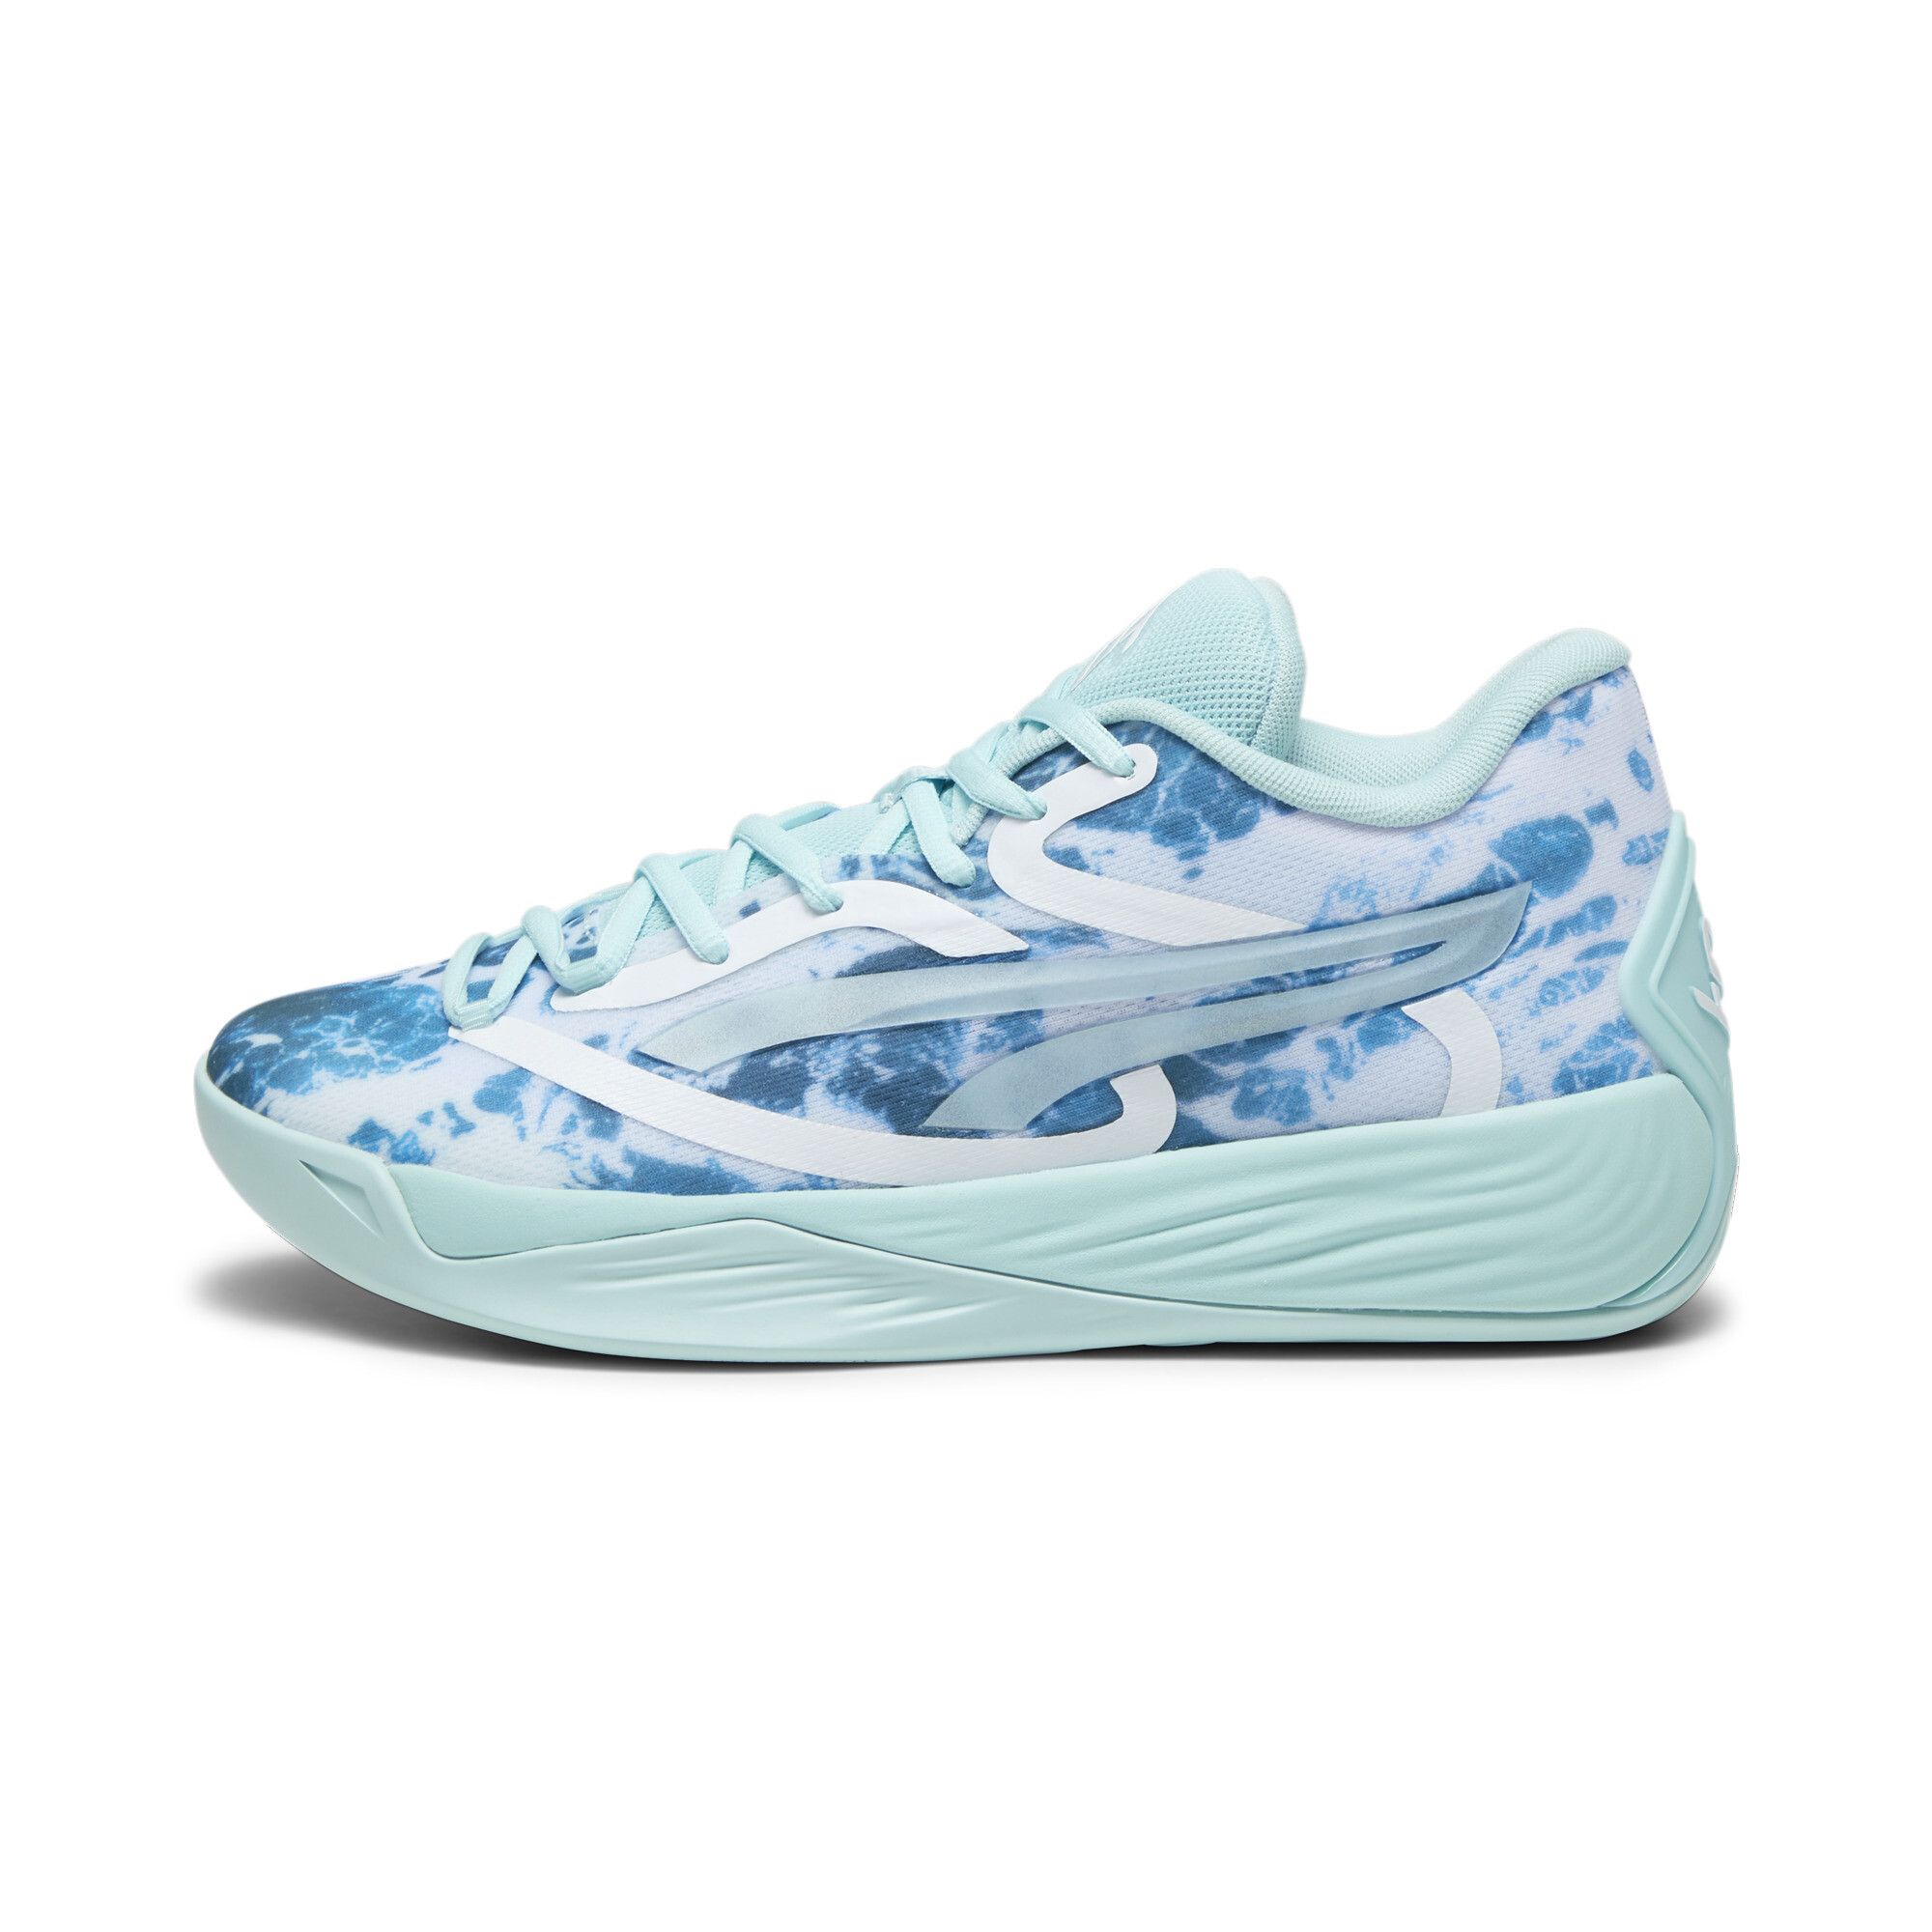 Women's Puma Stewie 2 Water's Basketball Shoes, Blue, Size 44, Shoes